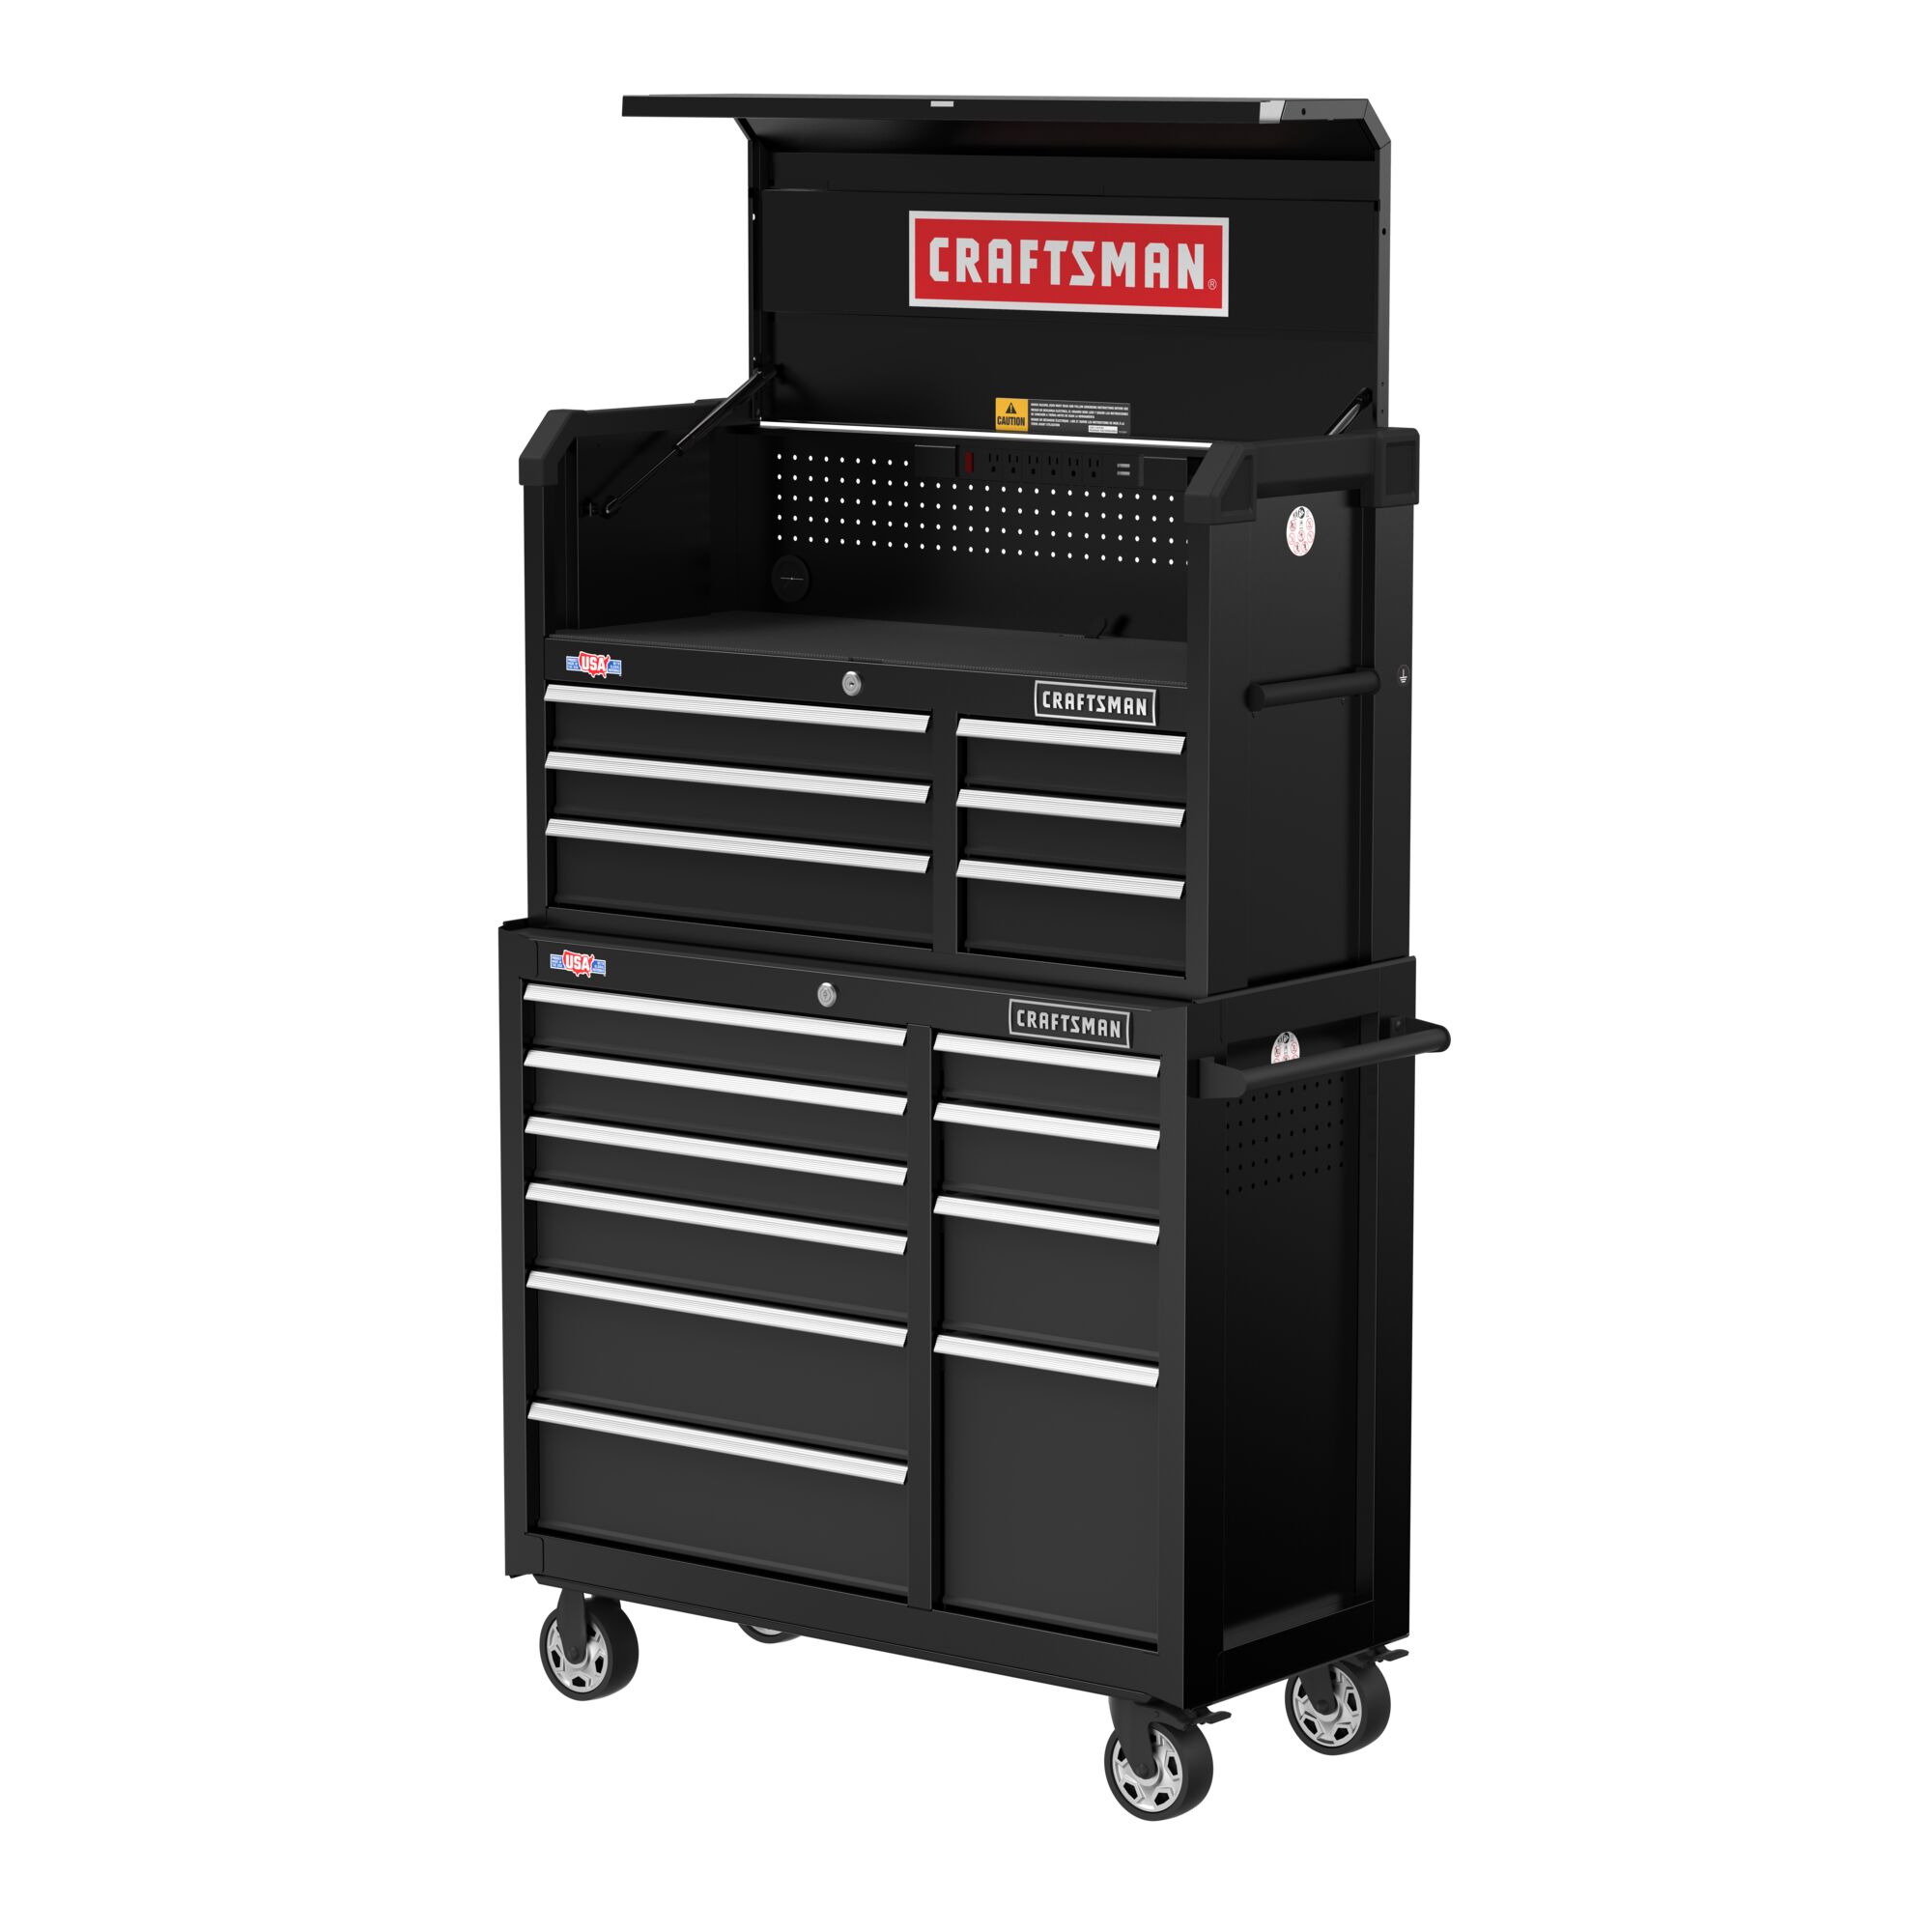 41 inch 6 drawer tool chest placed on top of 5 drawer rolling tool cabinet.